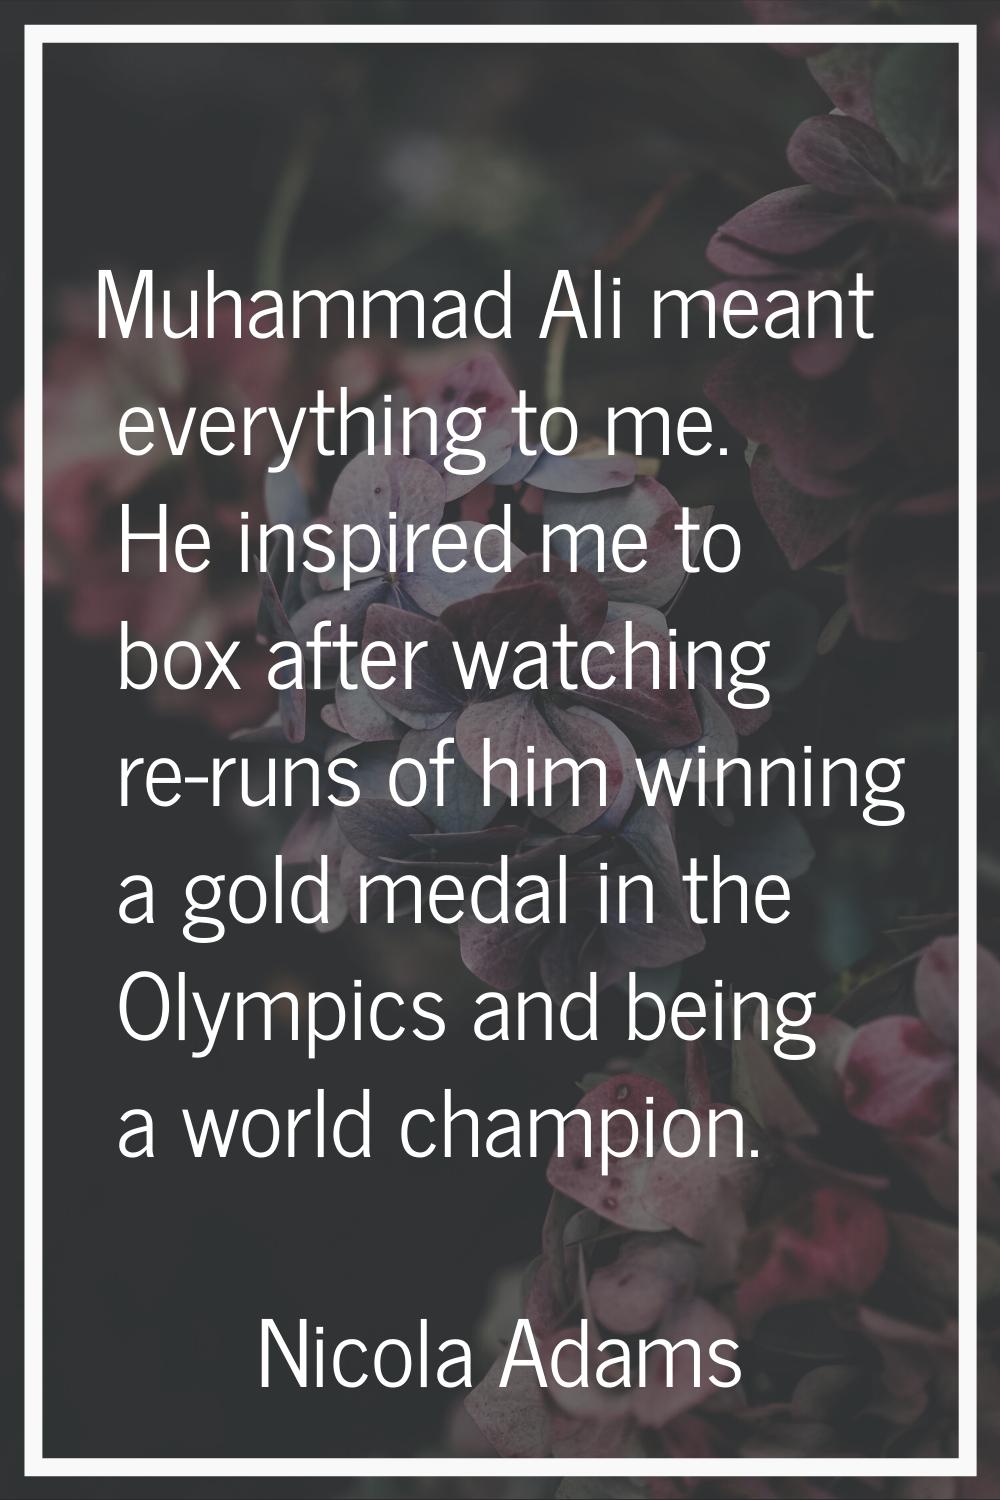 Muhammad Ali meant everything to me. He inspired me to box after watching re-runs of him winning a 